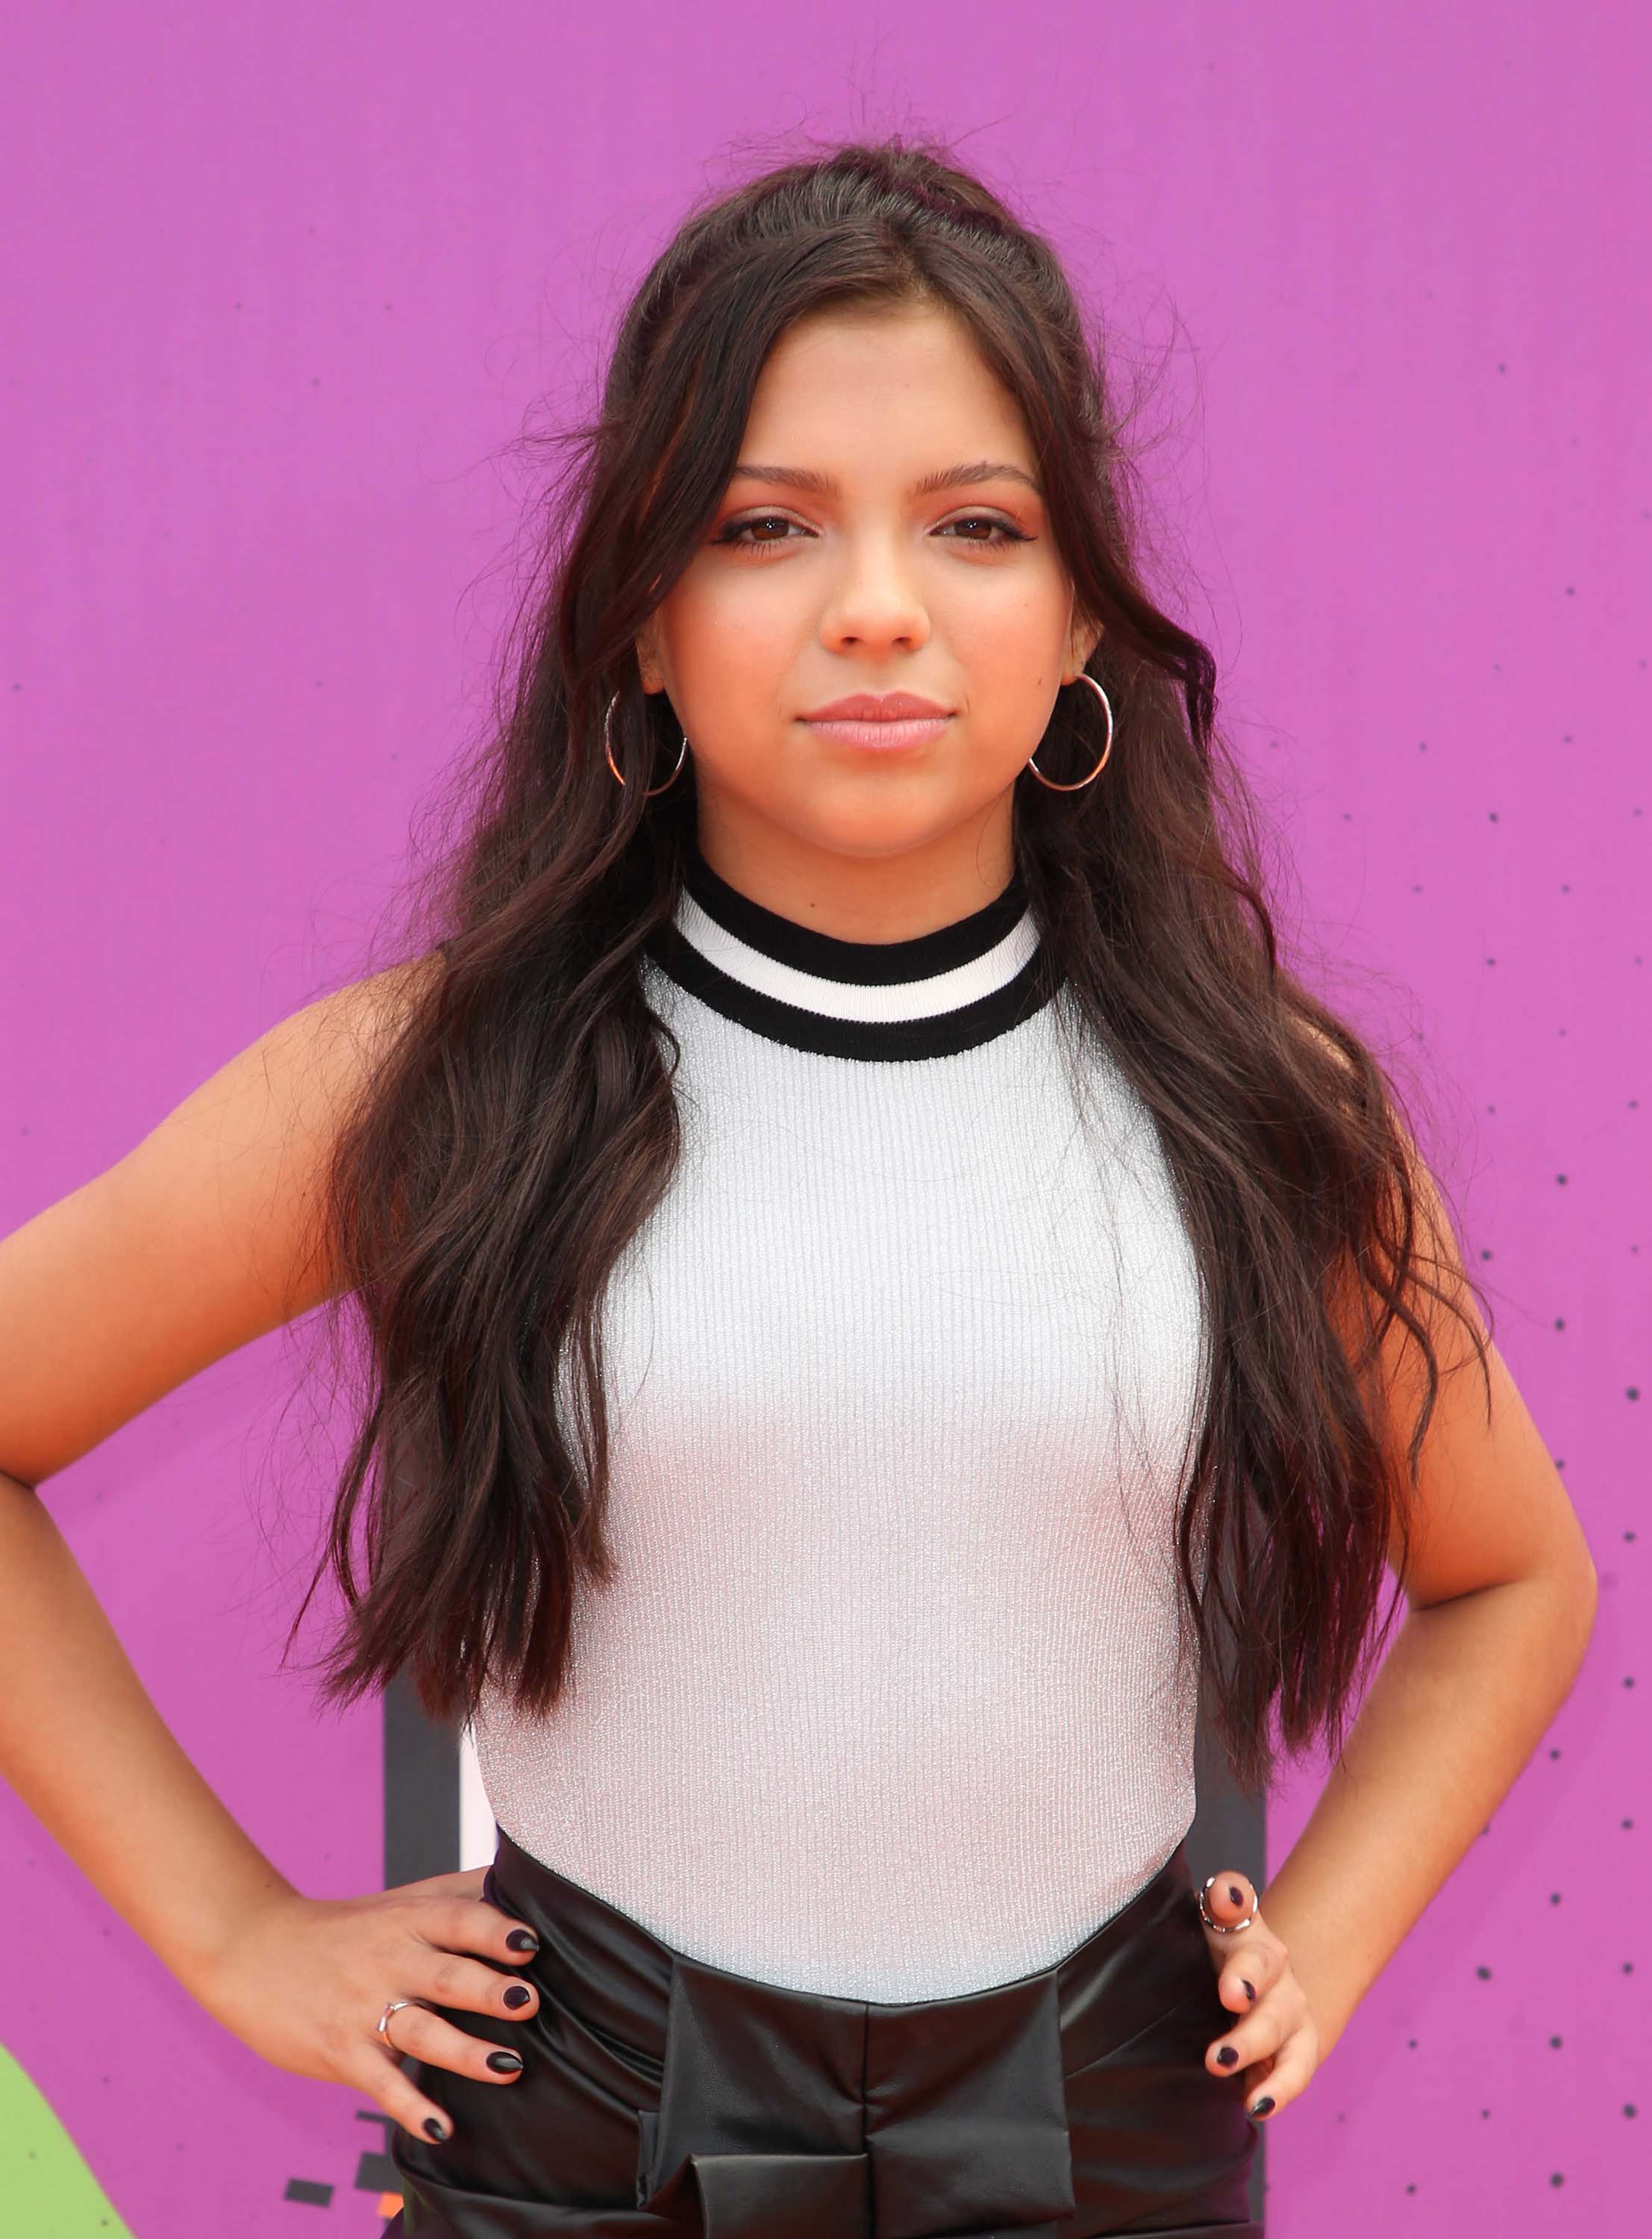 Cree Cicchino attends the Nickelodeon Kids’ Choice Sports Awards